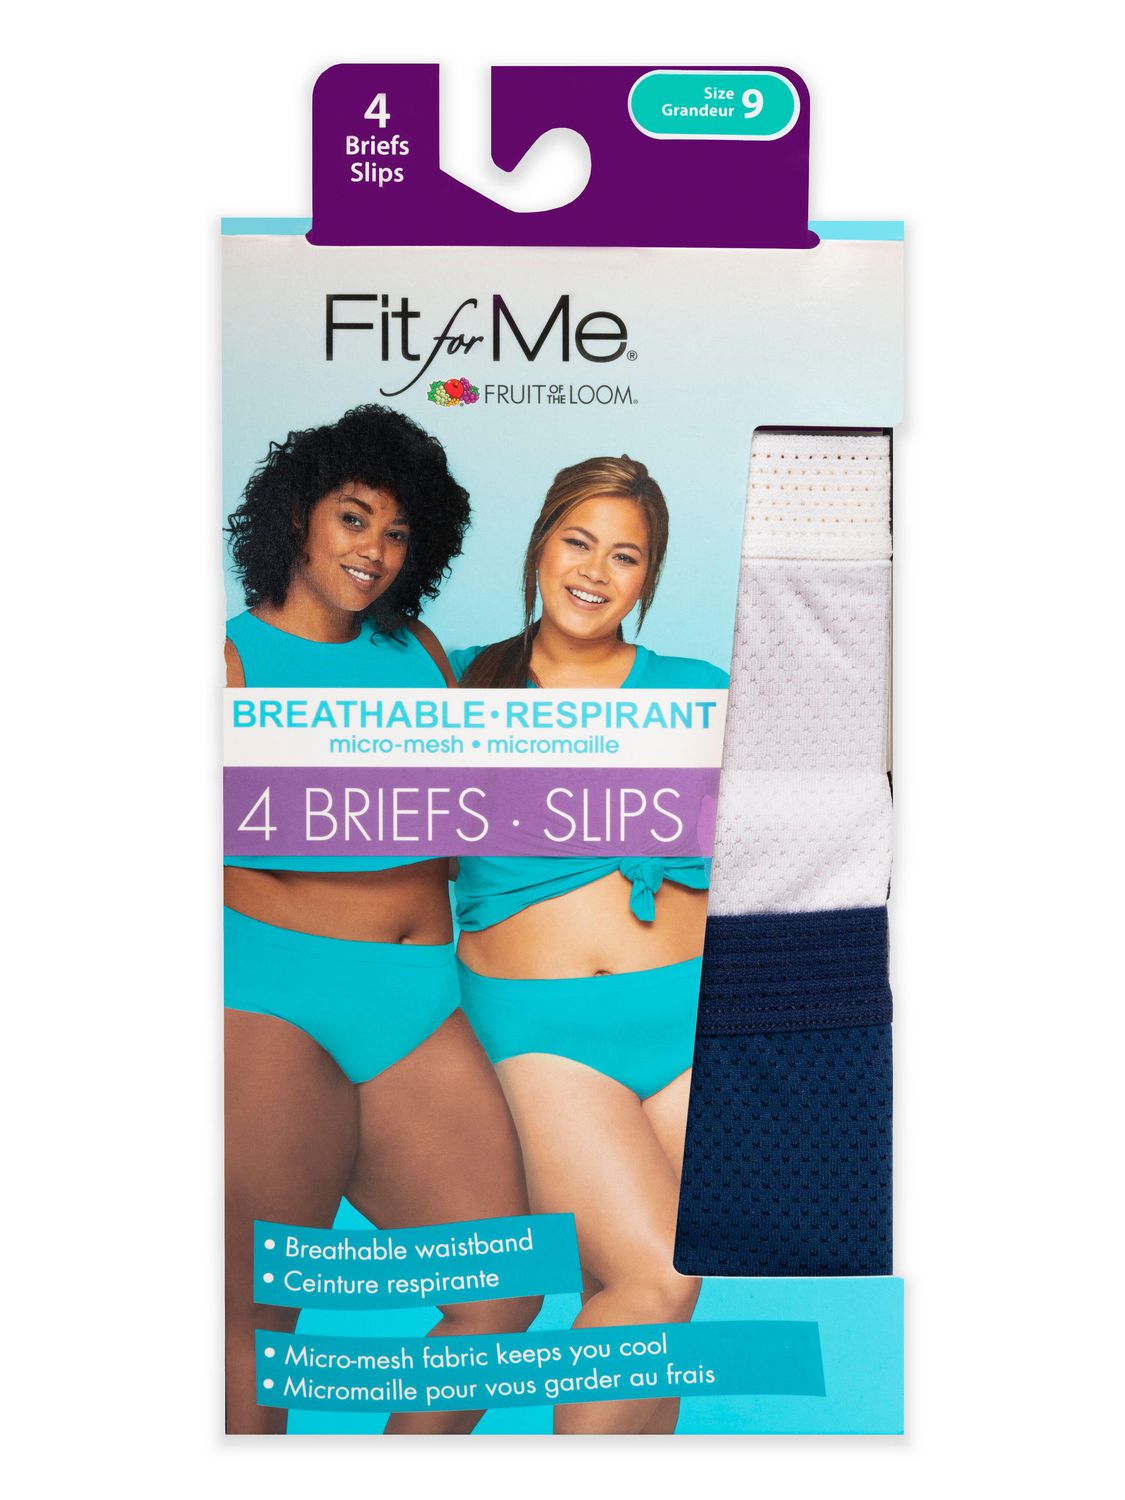 Women's Plus Fit for Me Assorted Heather Brief Underwear, 5 Pack; Sizes 9-13